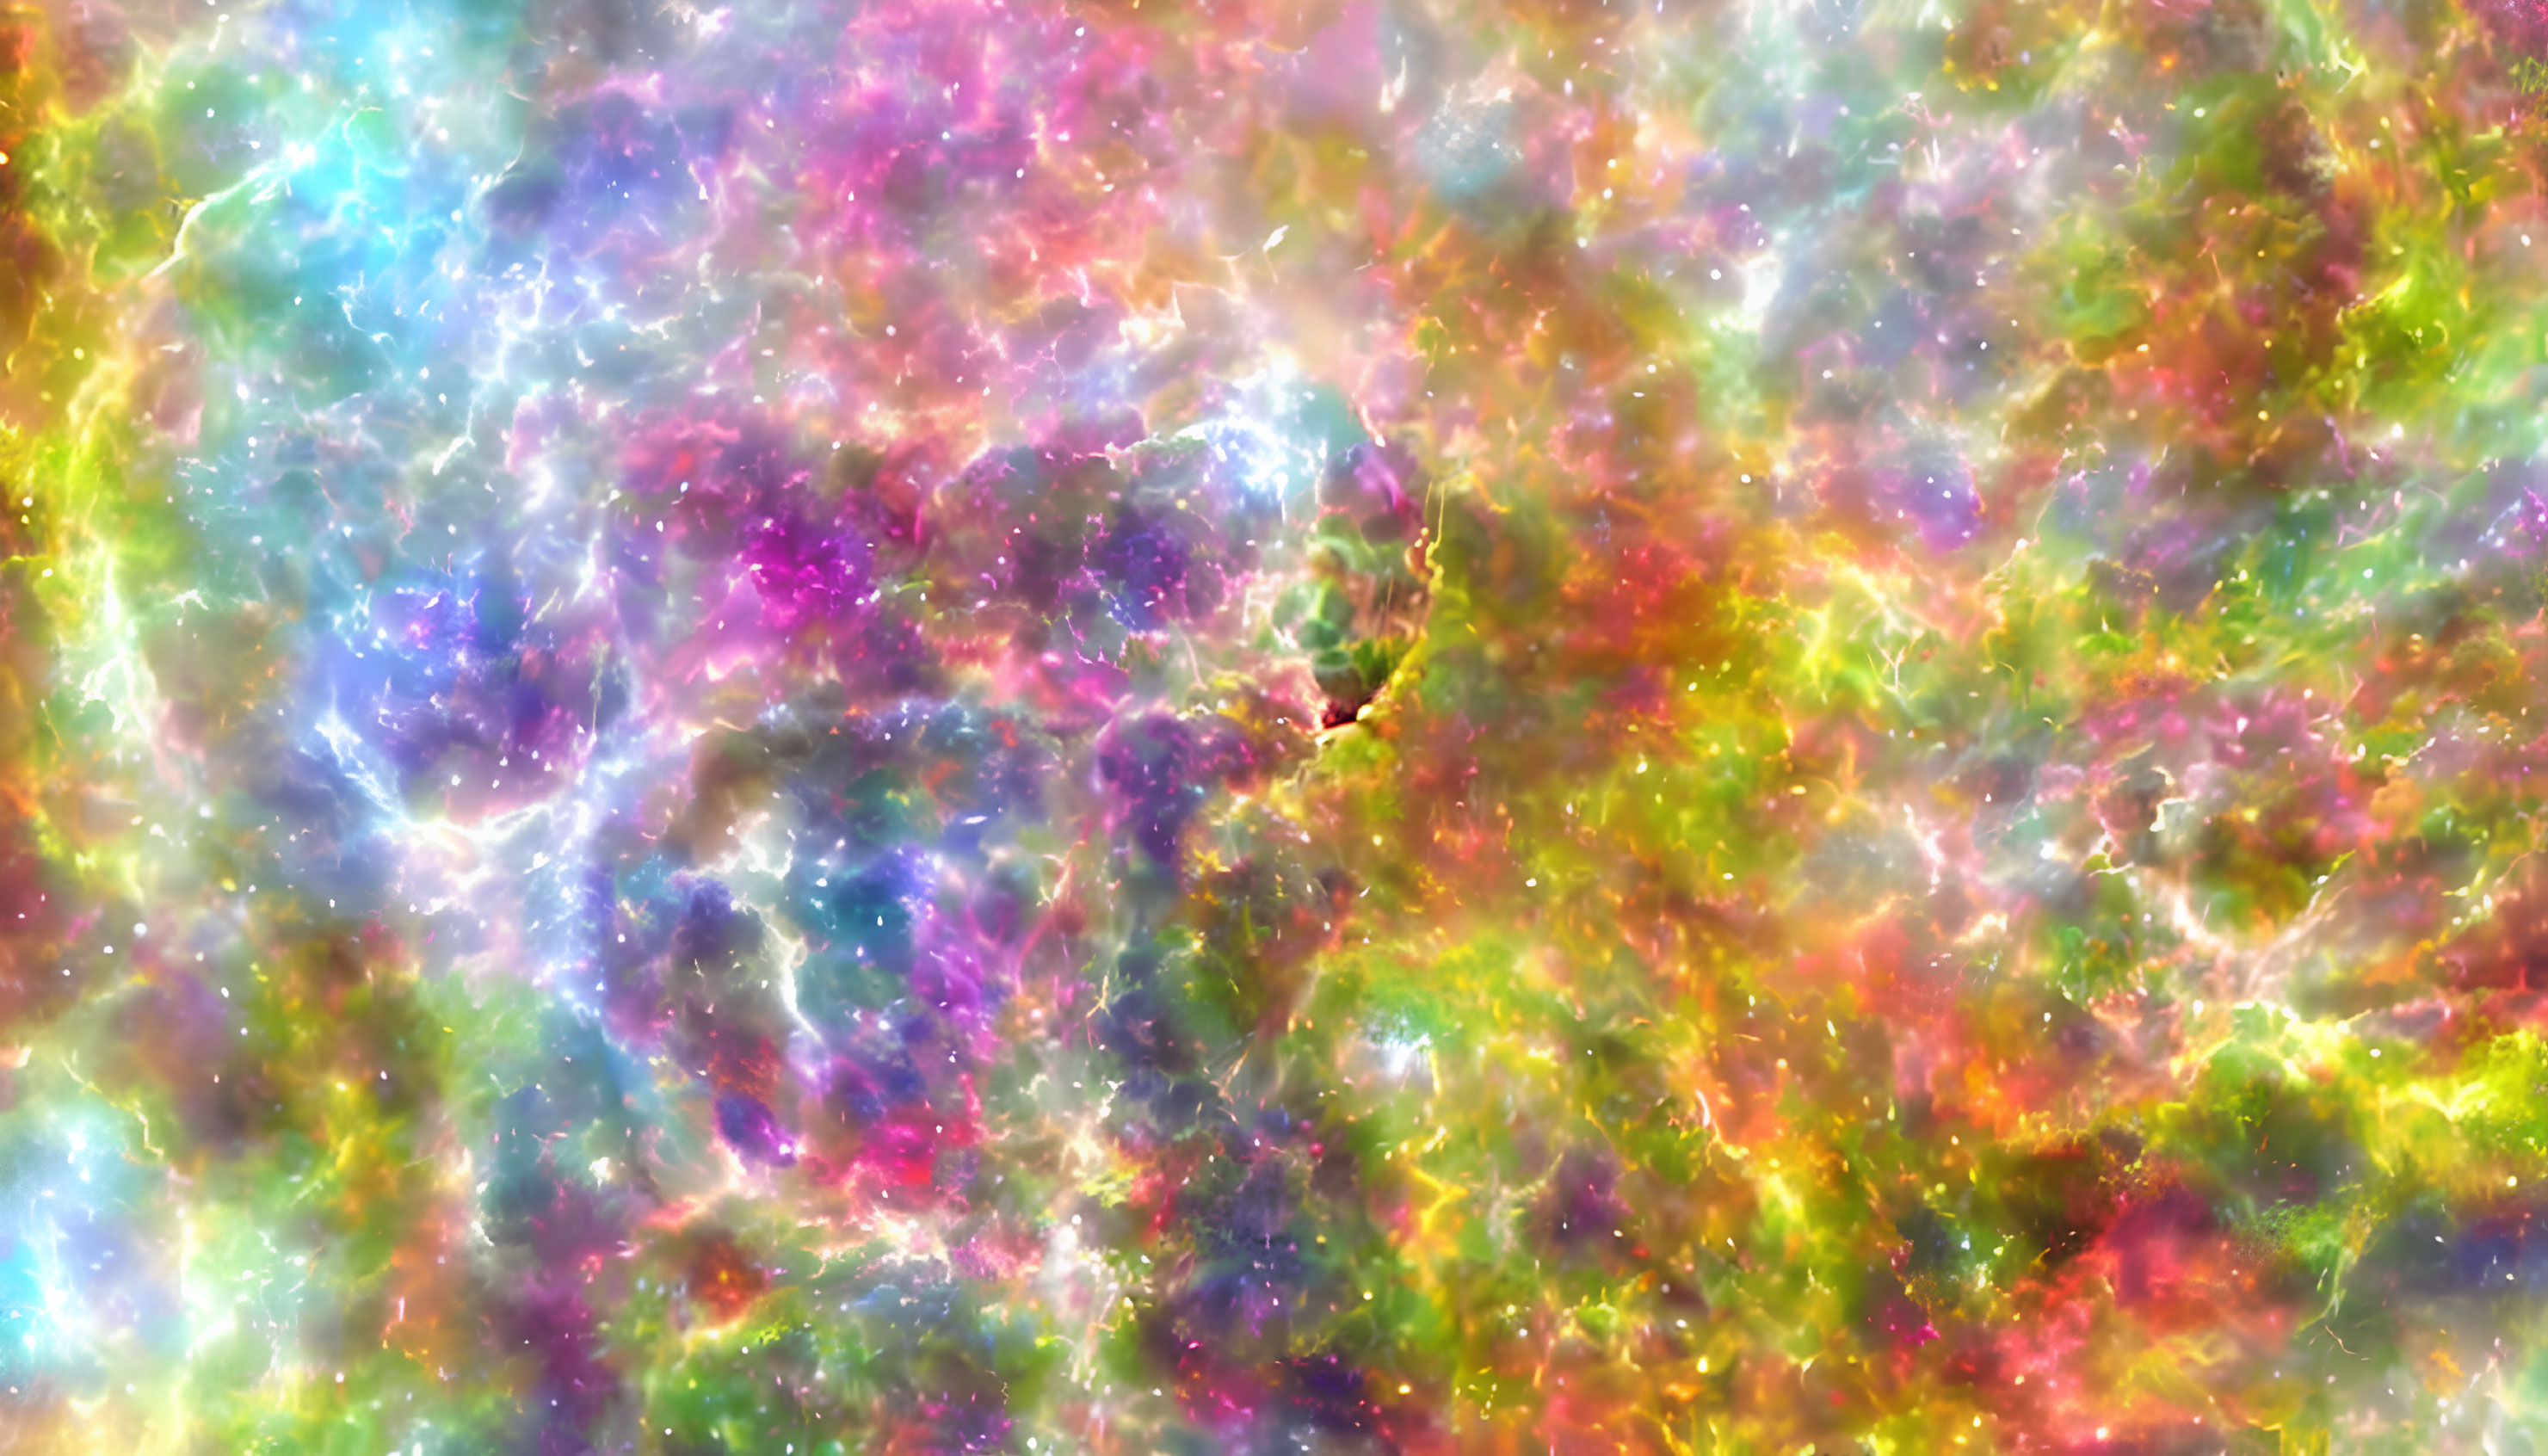 Colorful Cosmic Nebulae and Star Formations in Pink, Green, Blue, and Purple